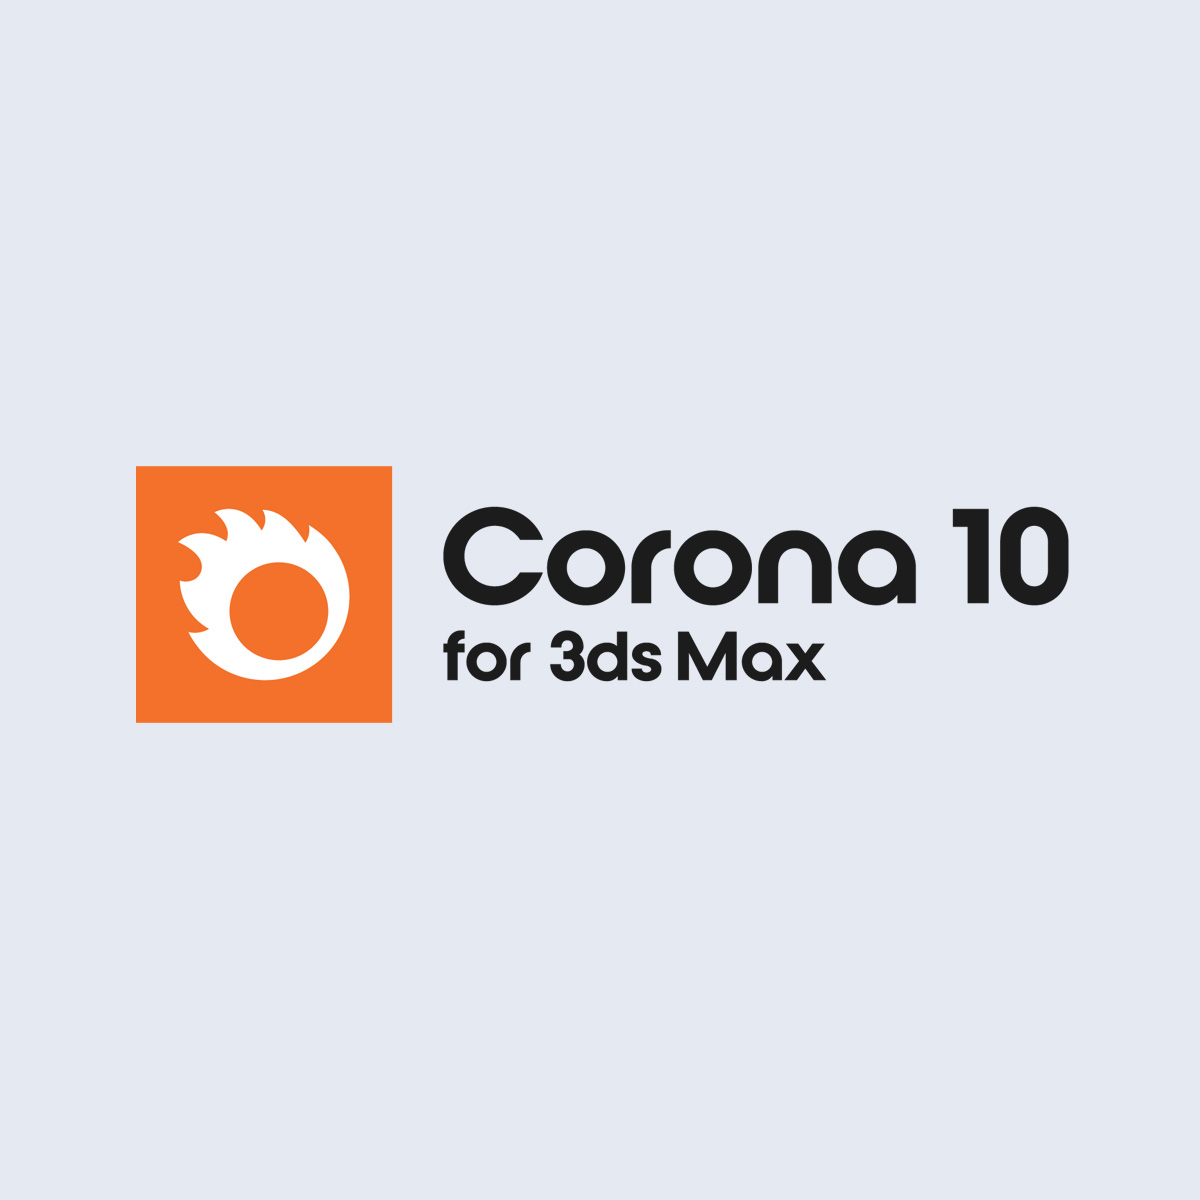 Corona 9 for 3ds Max